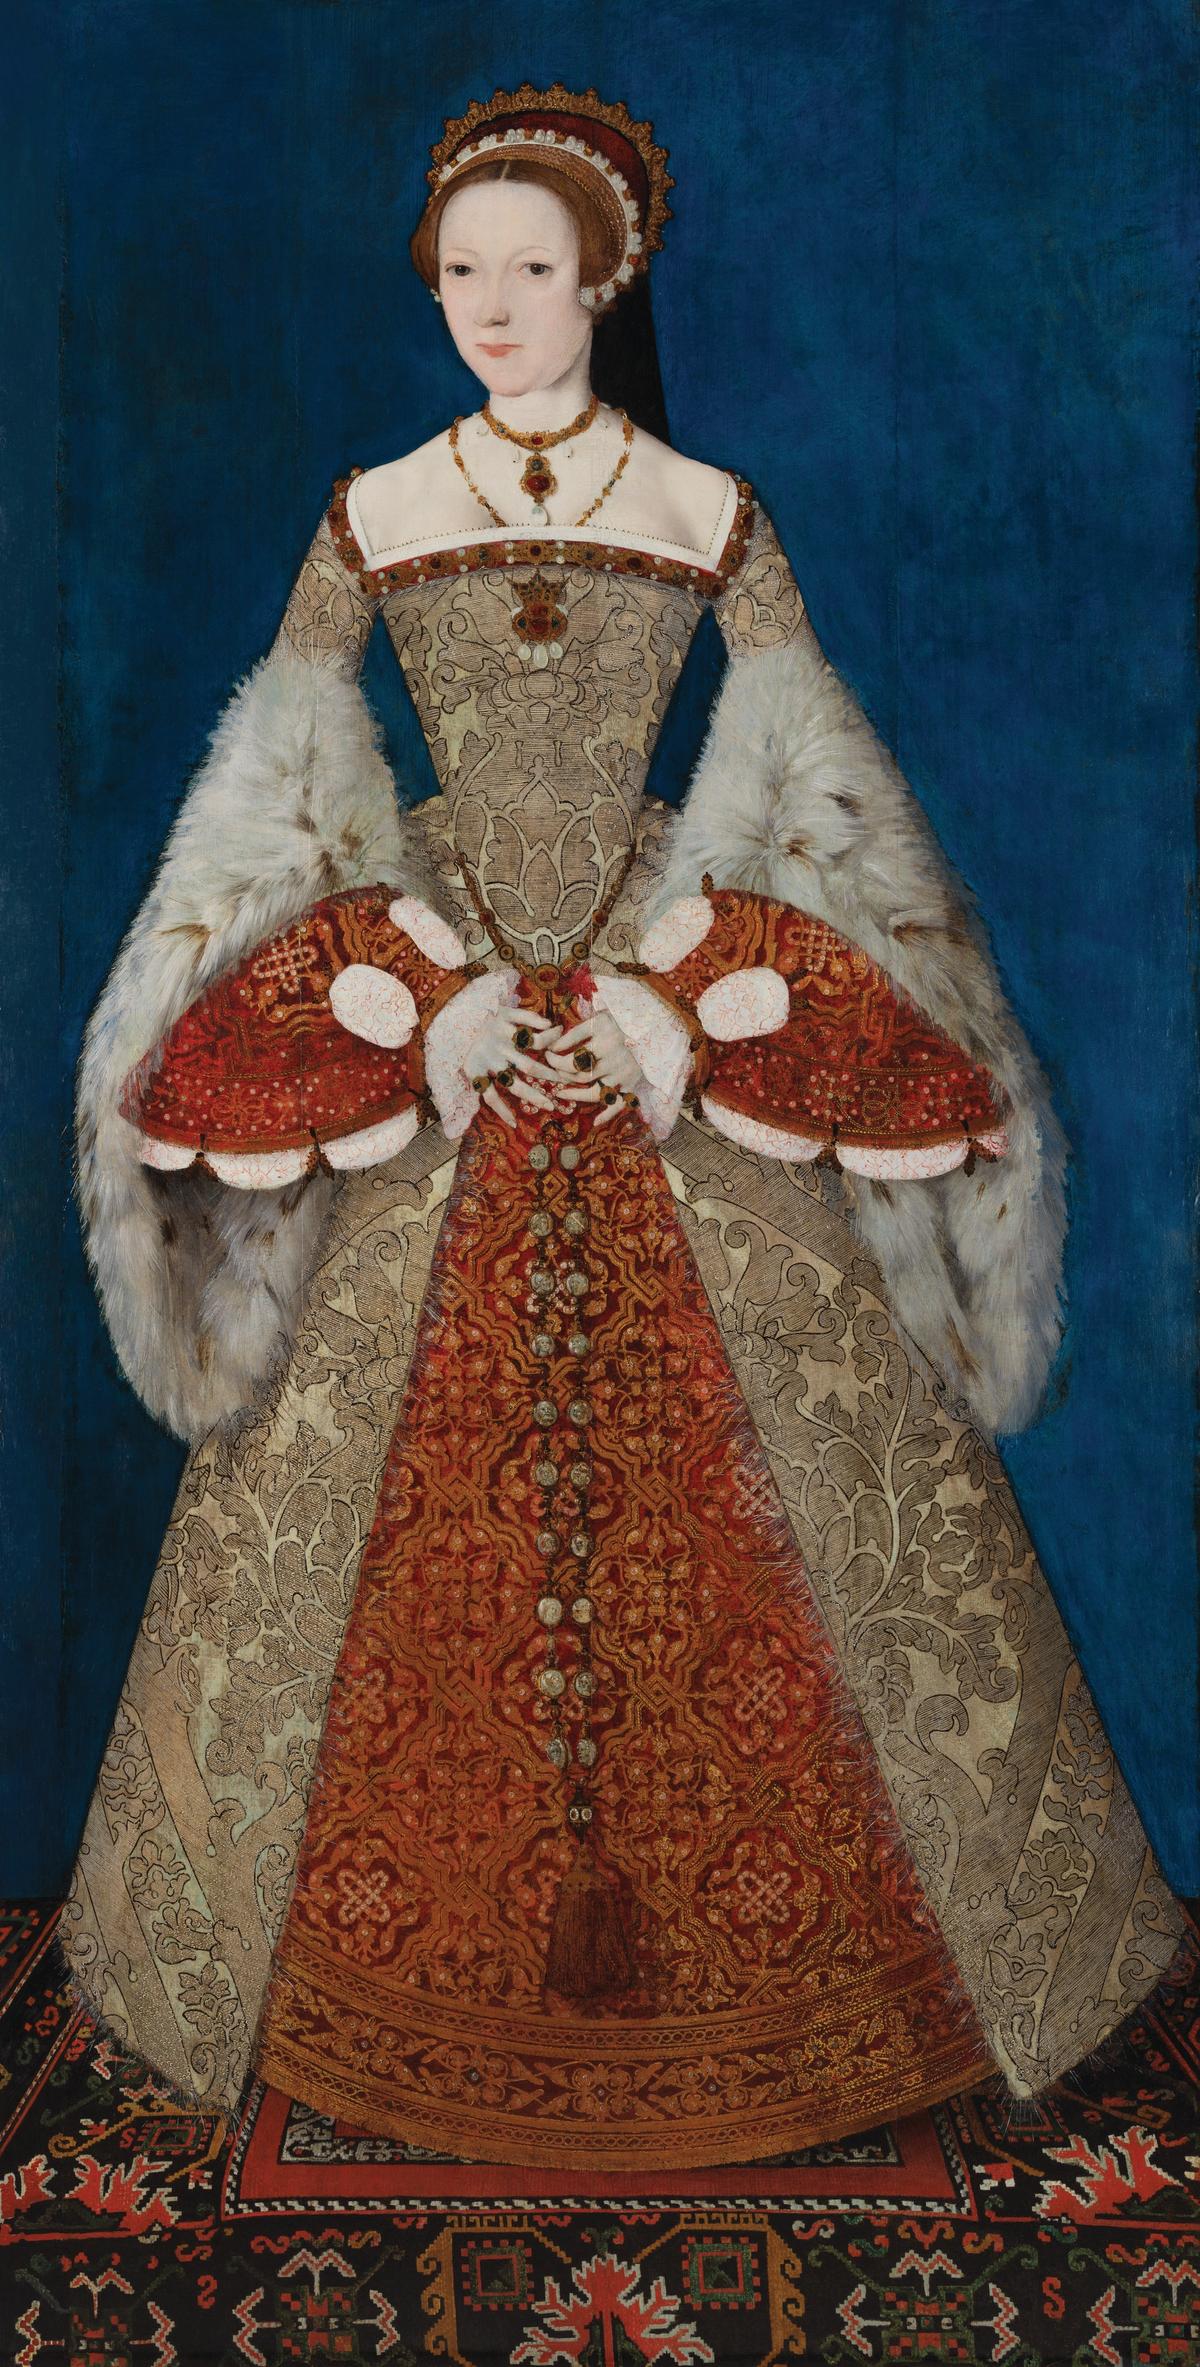 Katherine Parr (around 1545), attributed to Master John © National Portrait Gallery, London